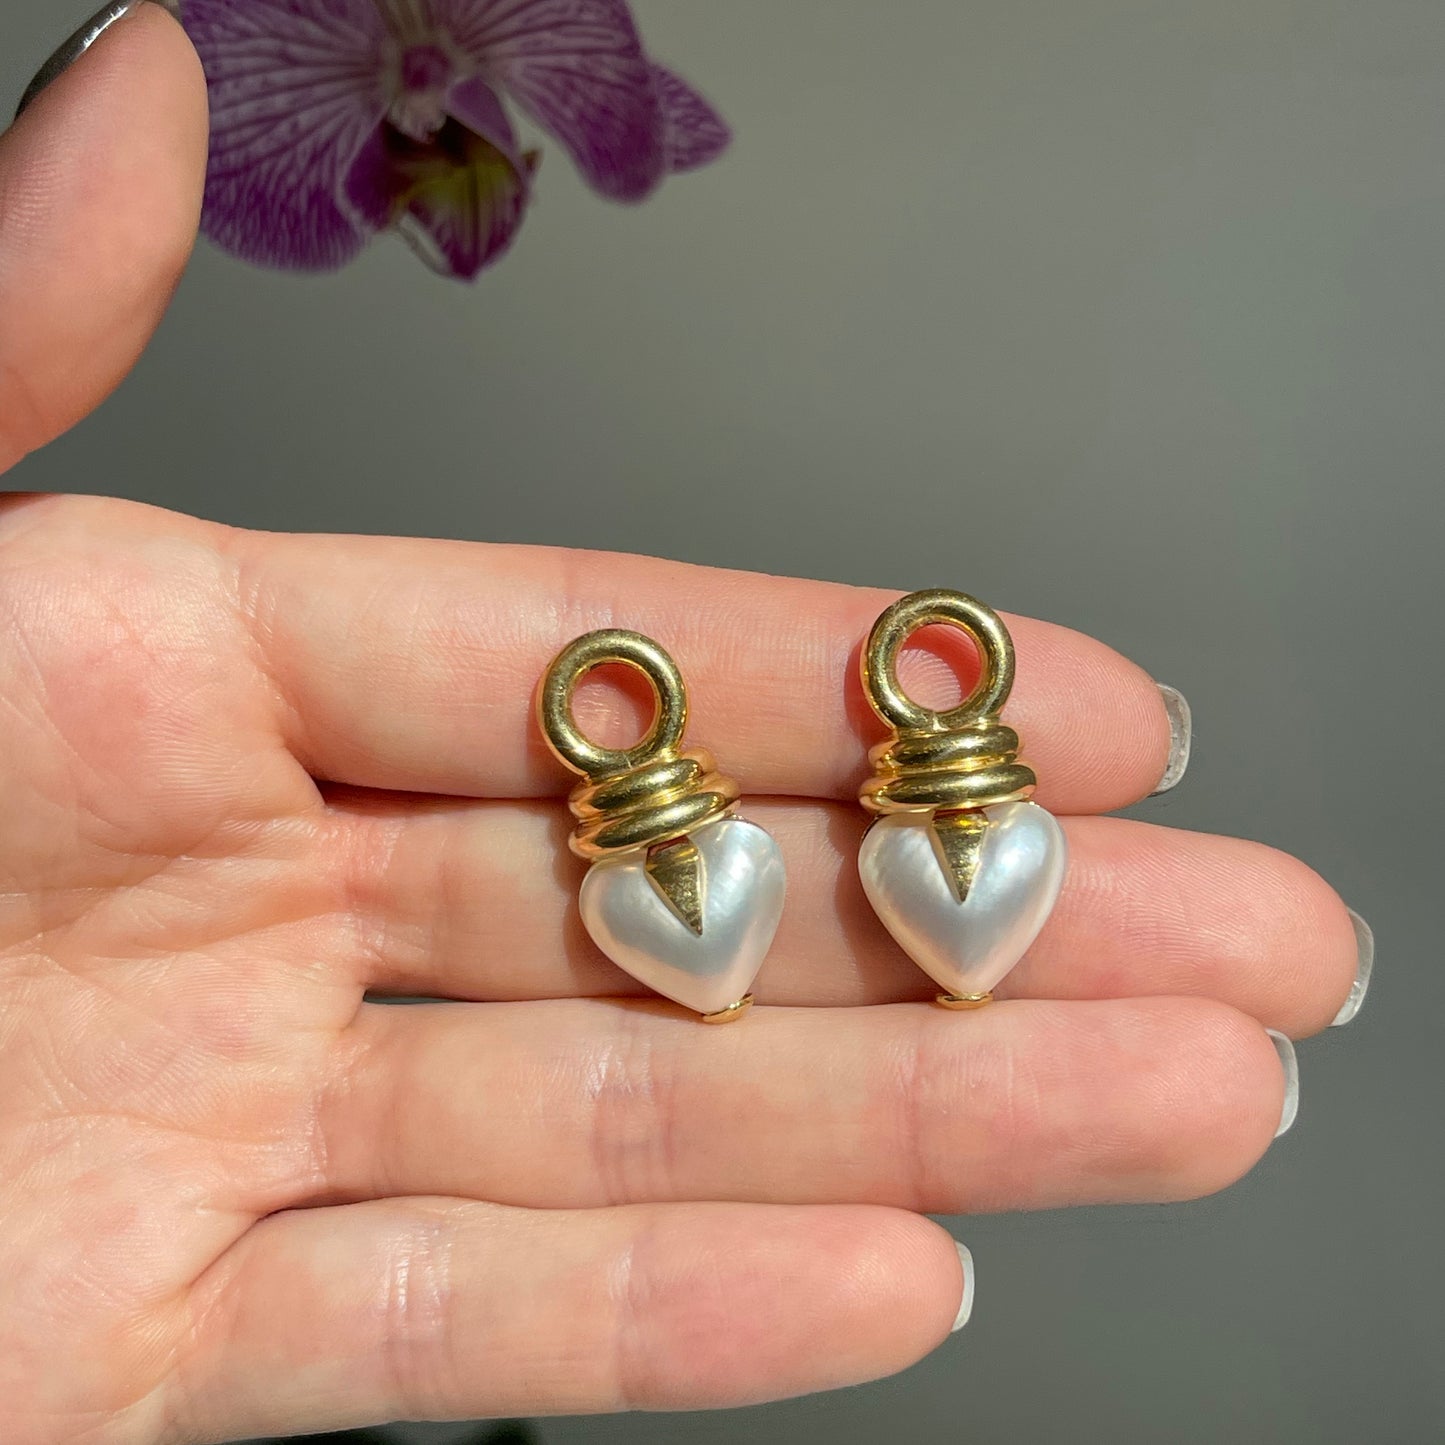 Estate 18KT Yellow Gold Heart Mabe Pearl Earring Charms